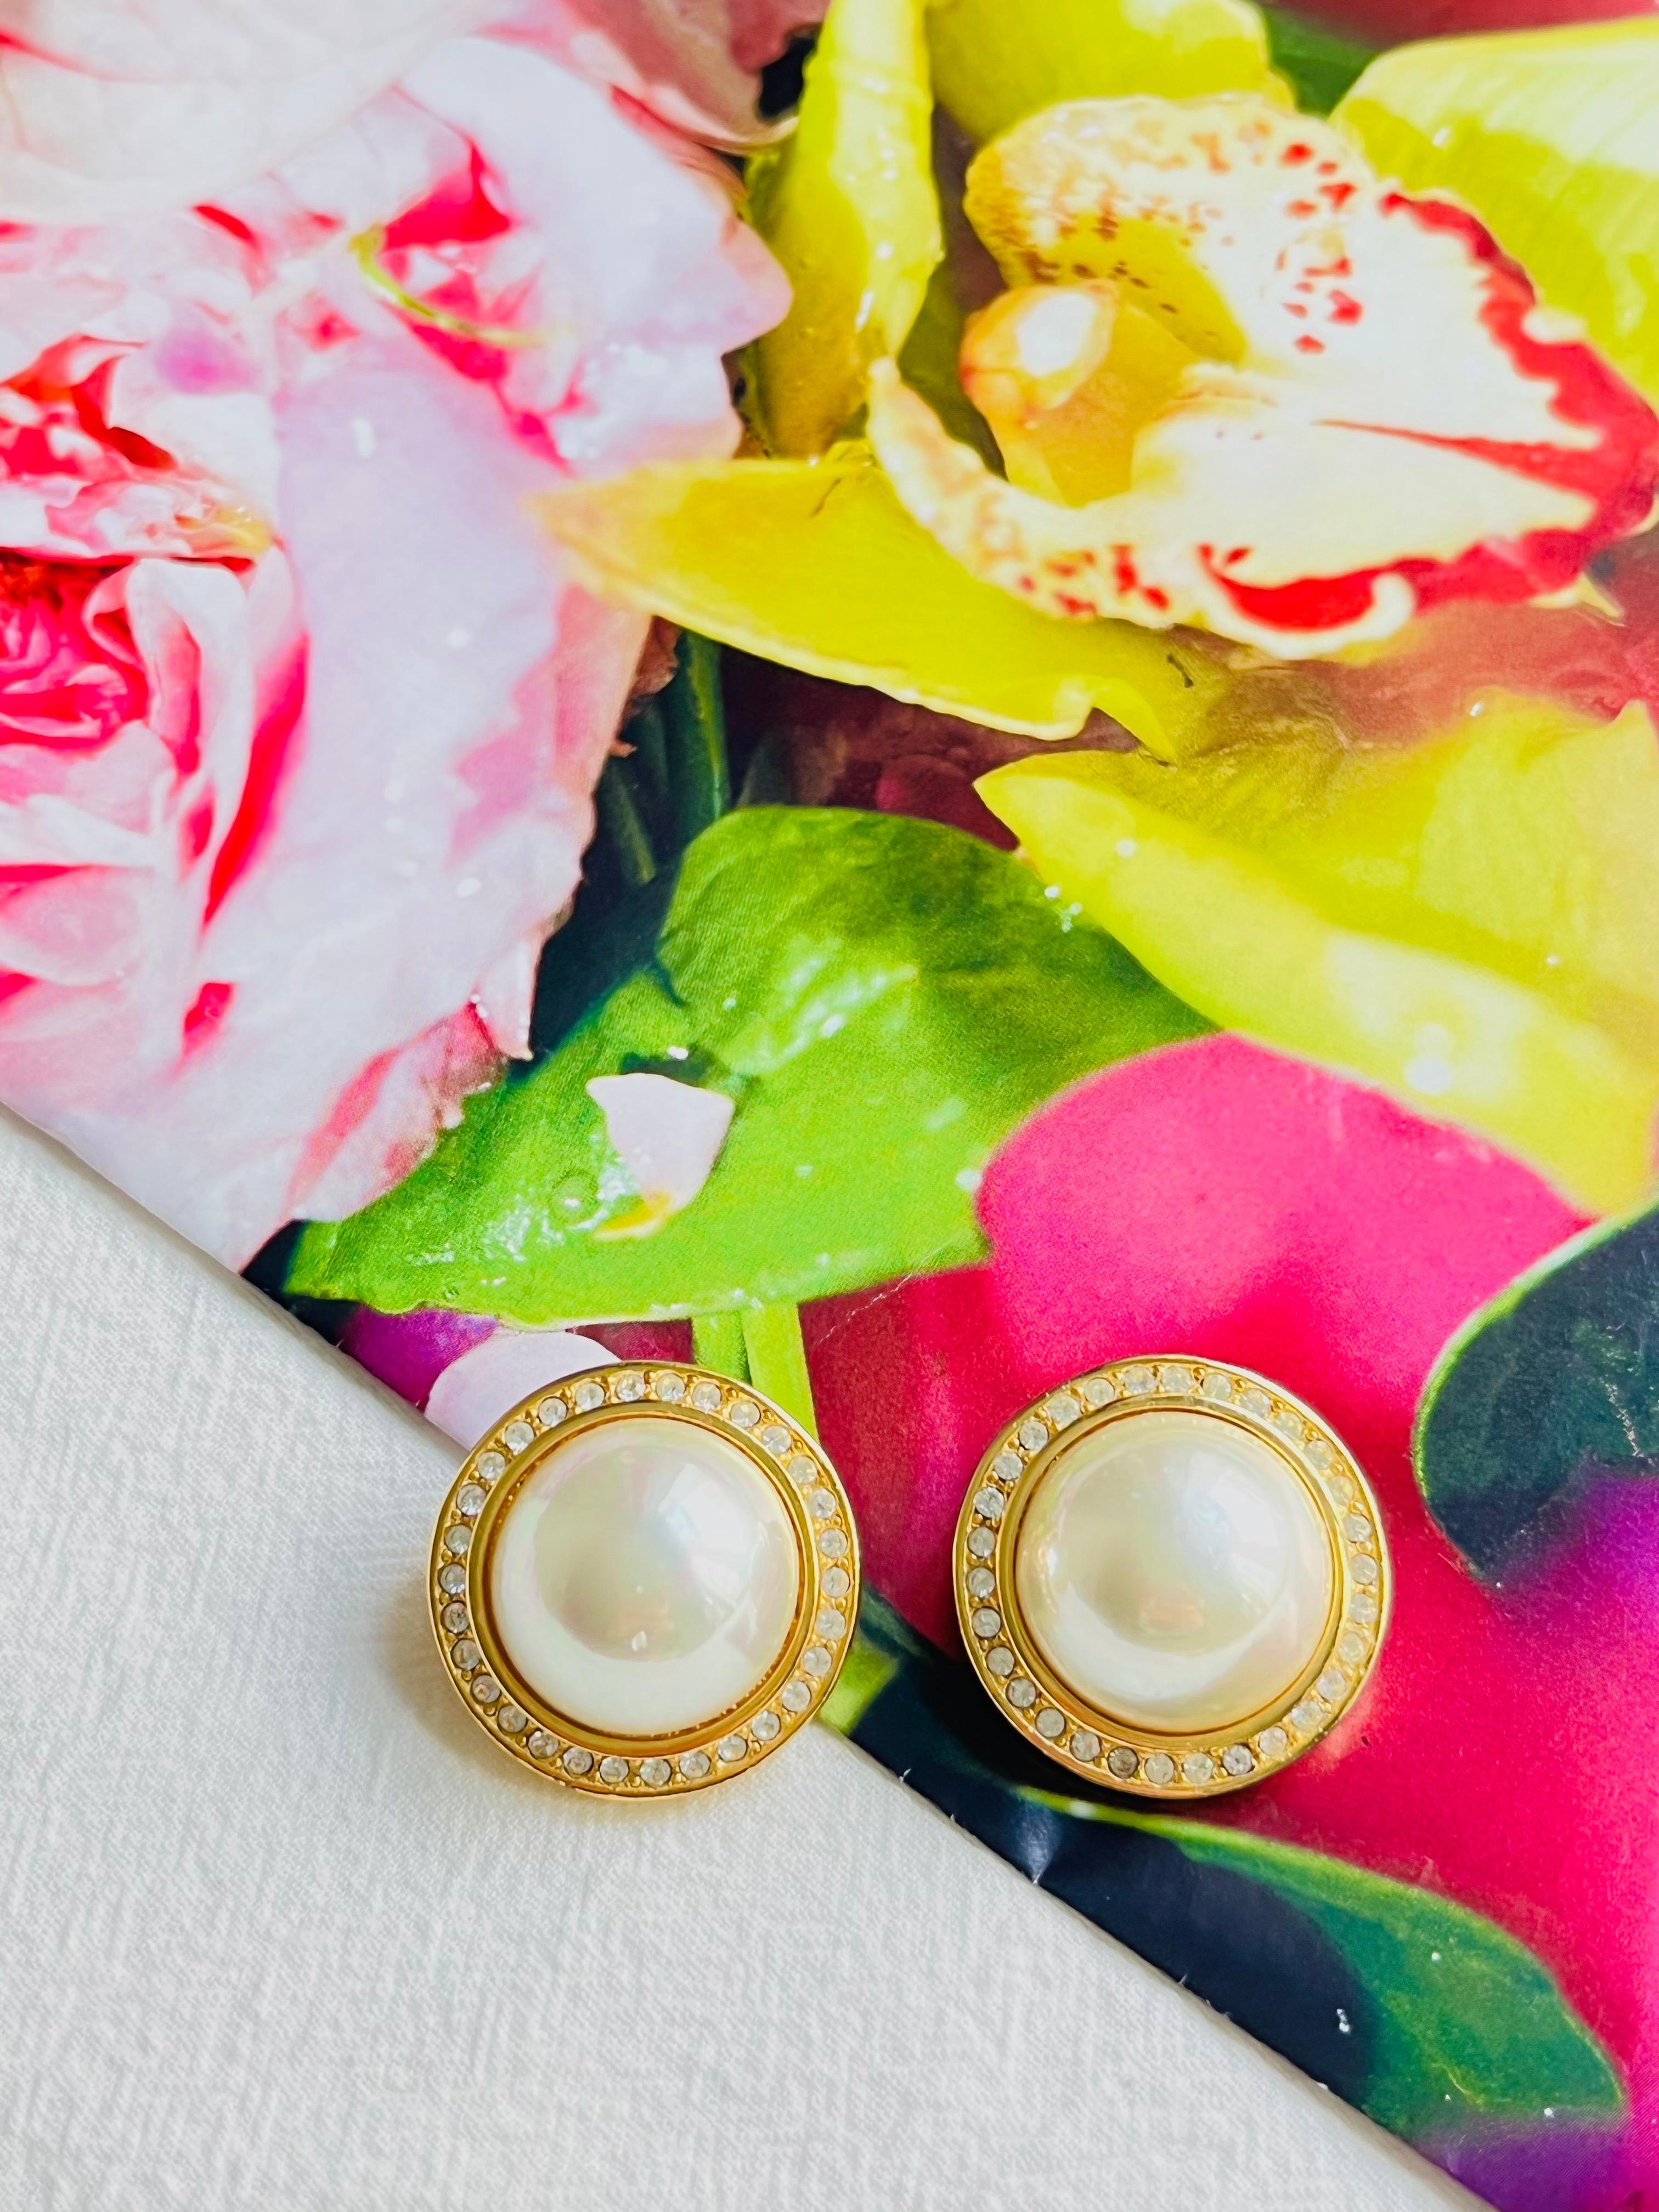 Christian Dior GROSSE 1990 CHC Large Round White Pearl Crystals Clip Earrings In Good Condition For Sale In Wokingham, England